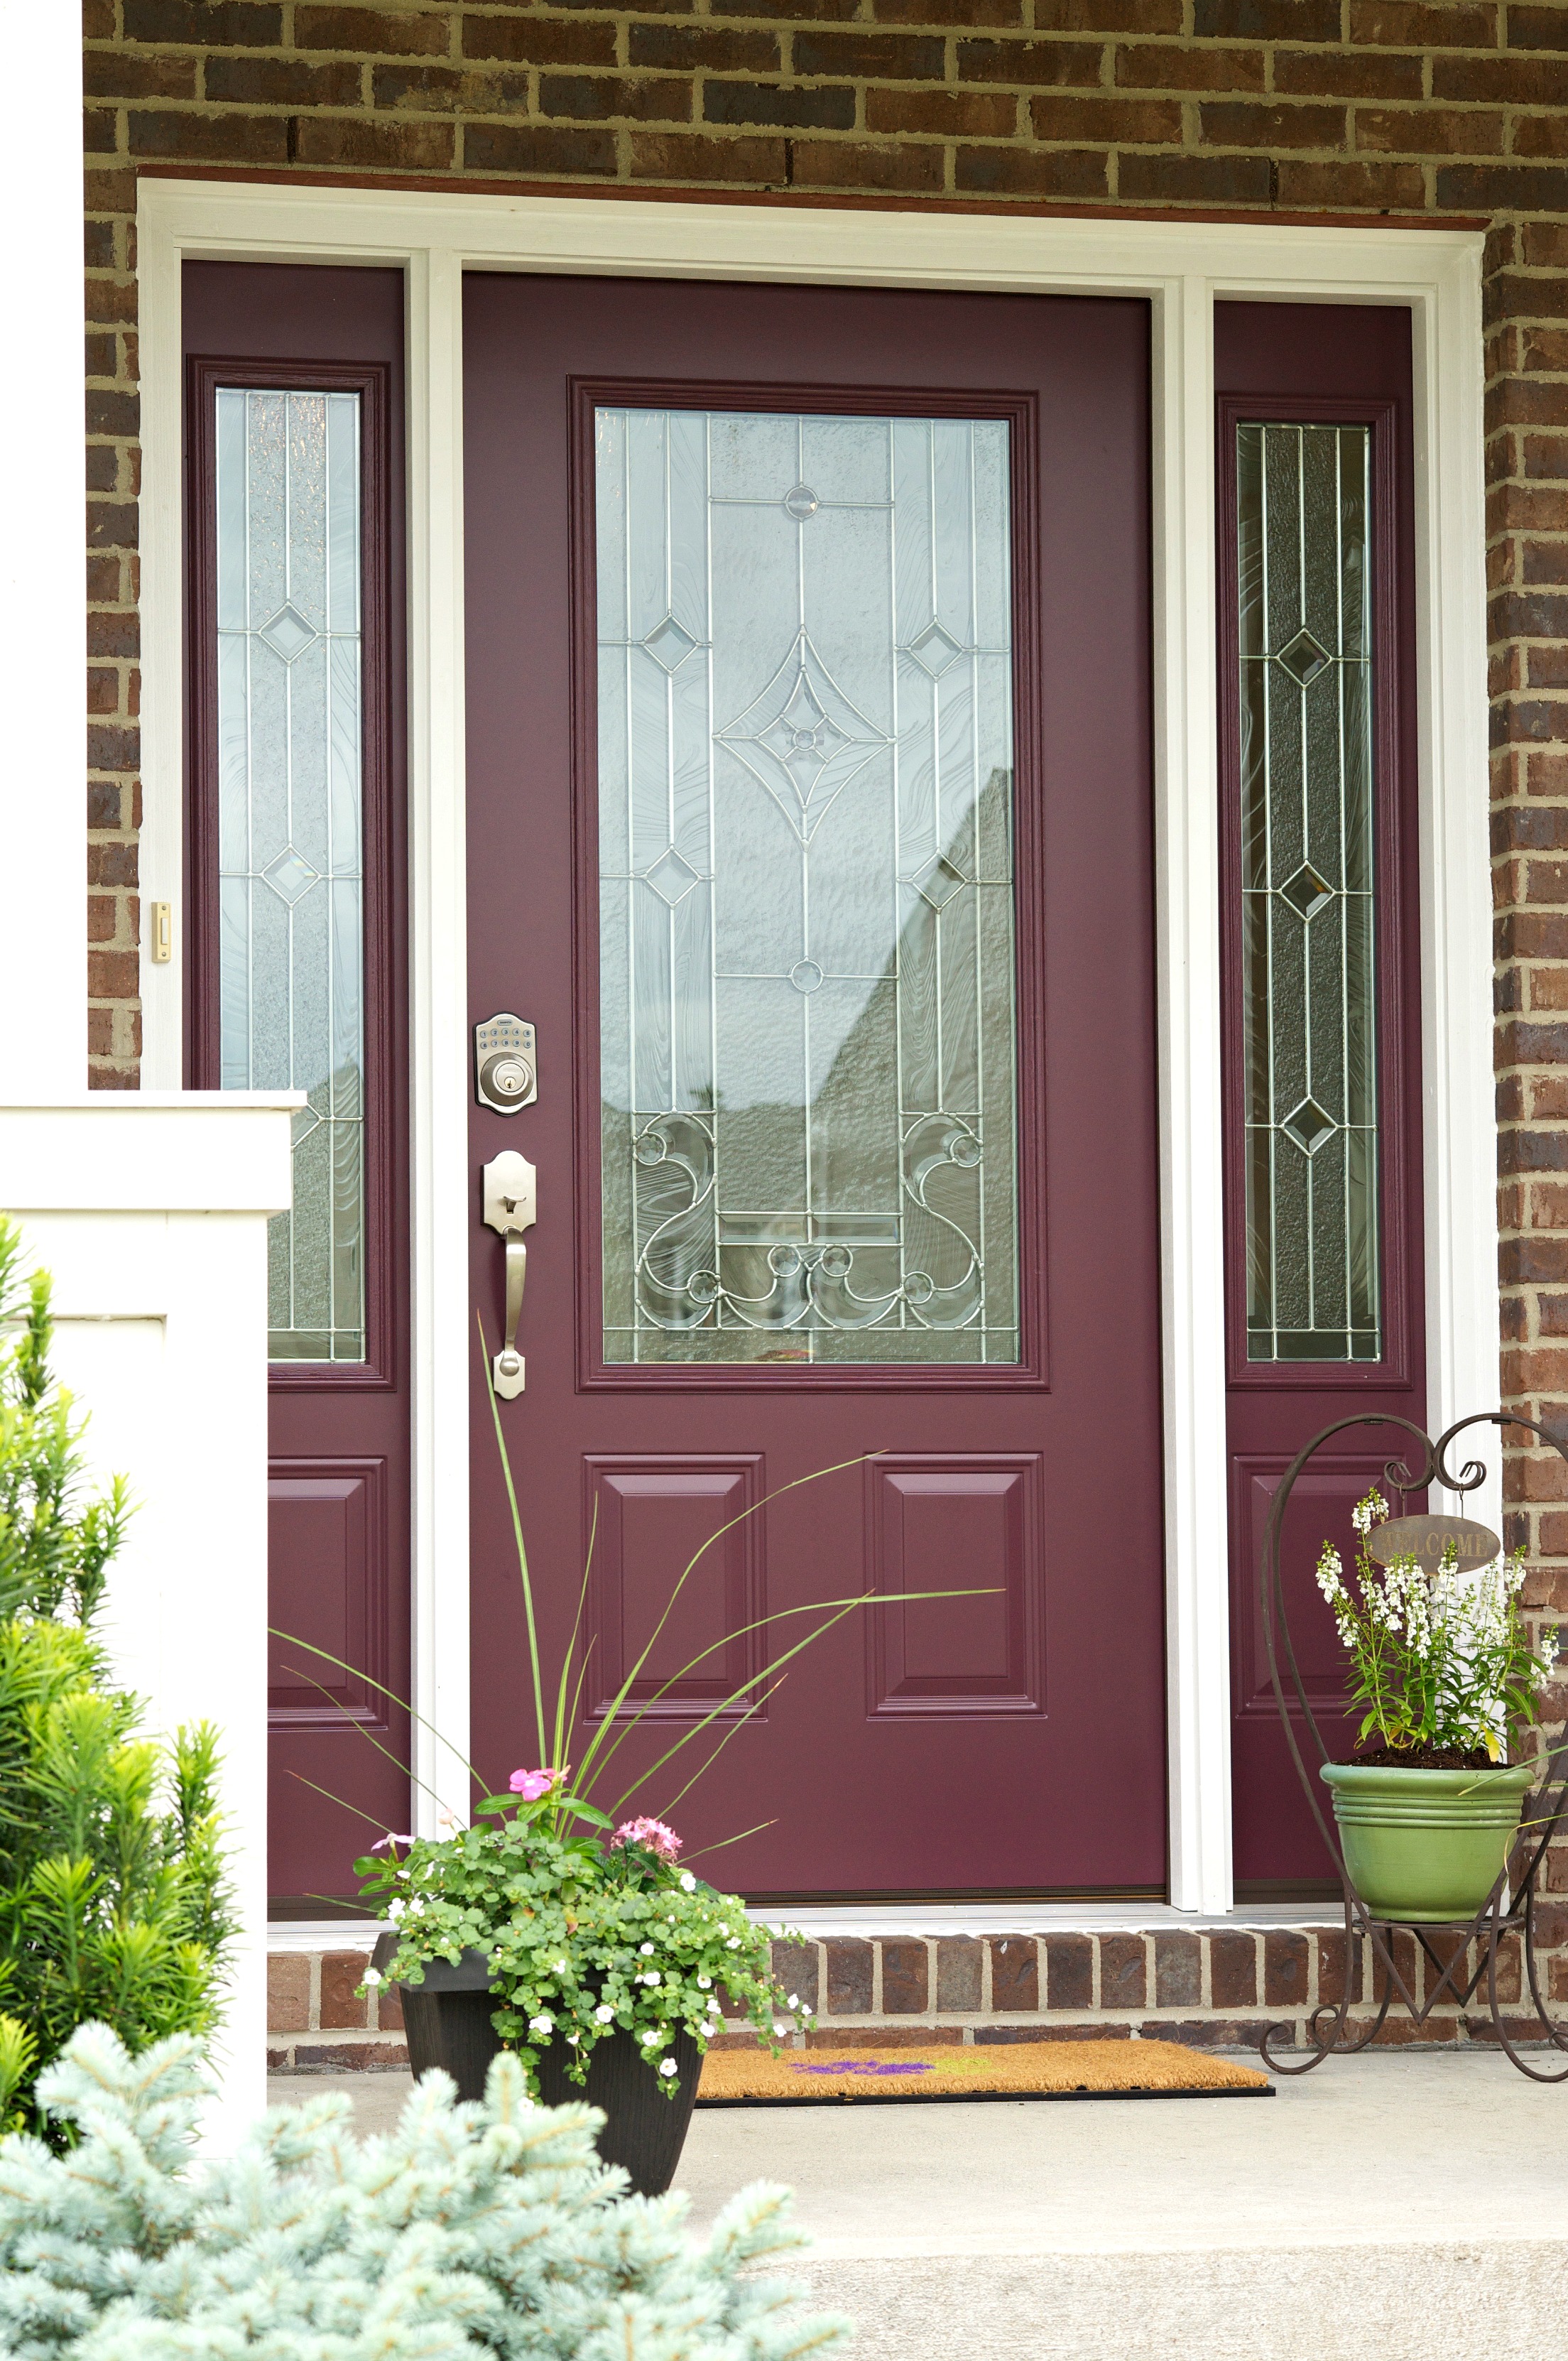 Wow! You've got to see this before and after! This new decorative glass front door adds so much style and curb appeal to this home! 